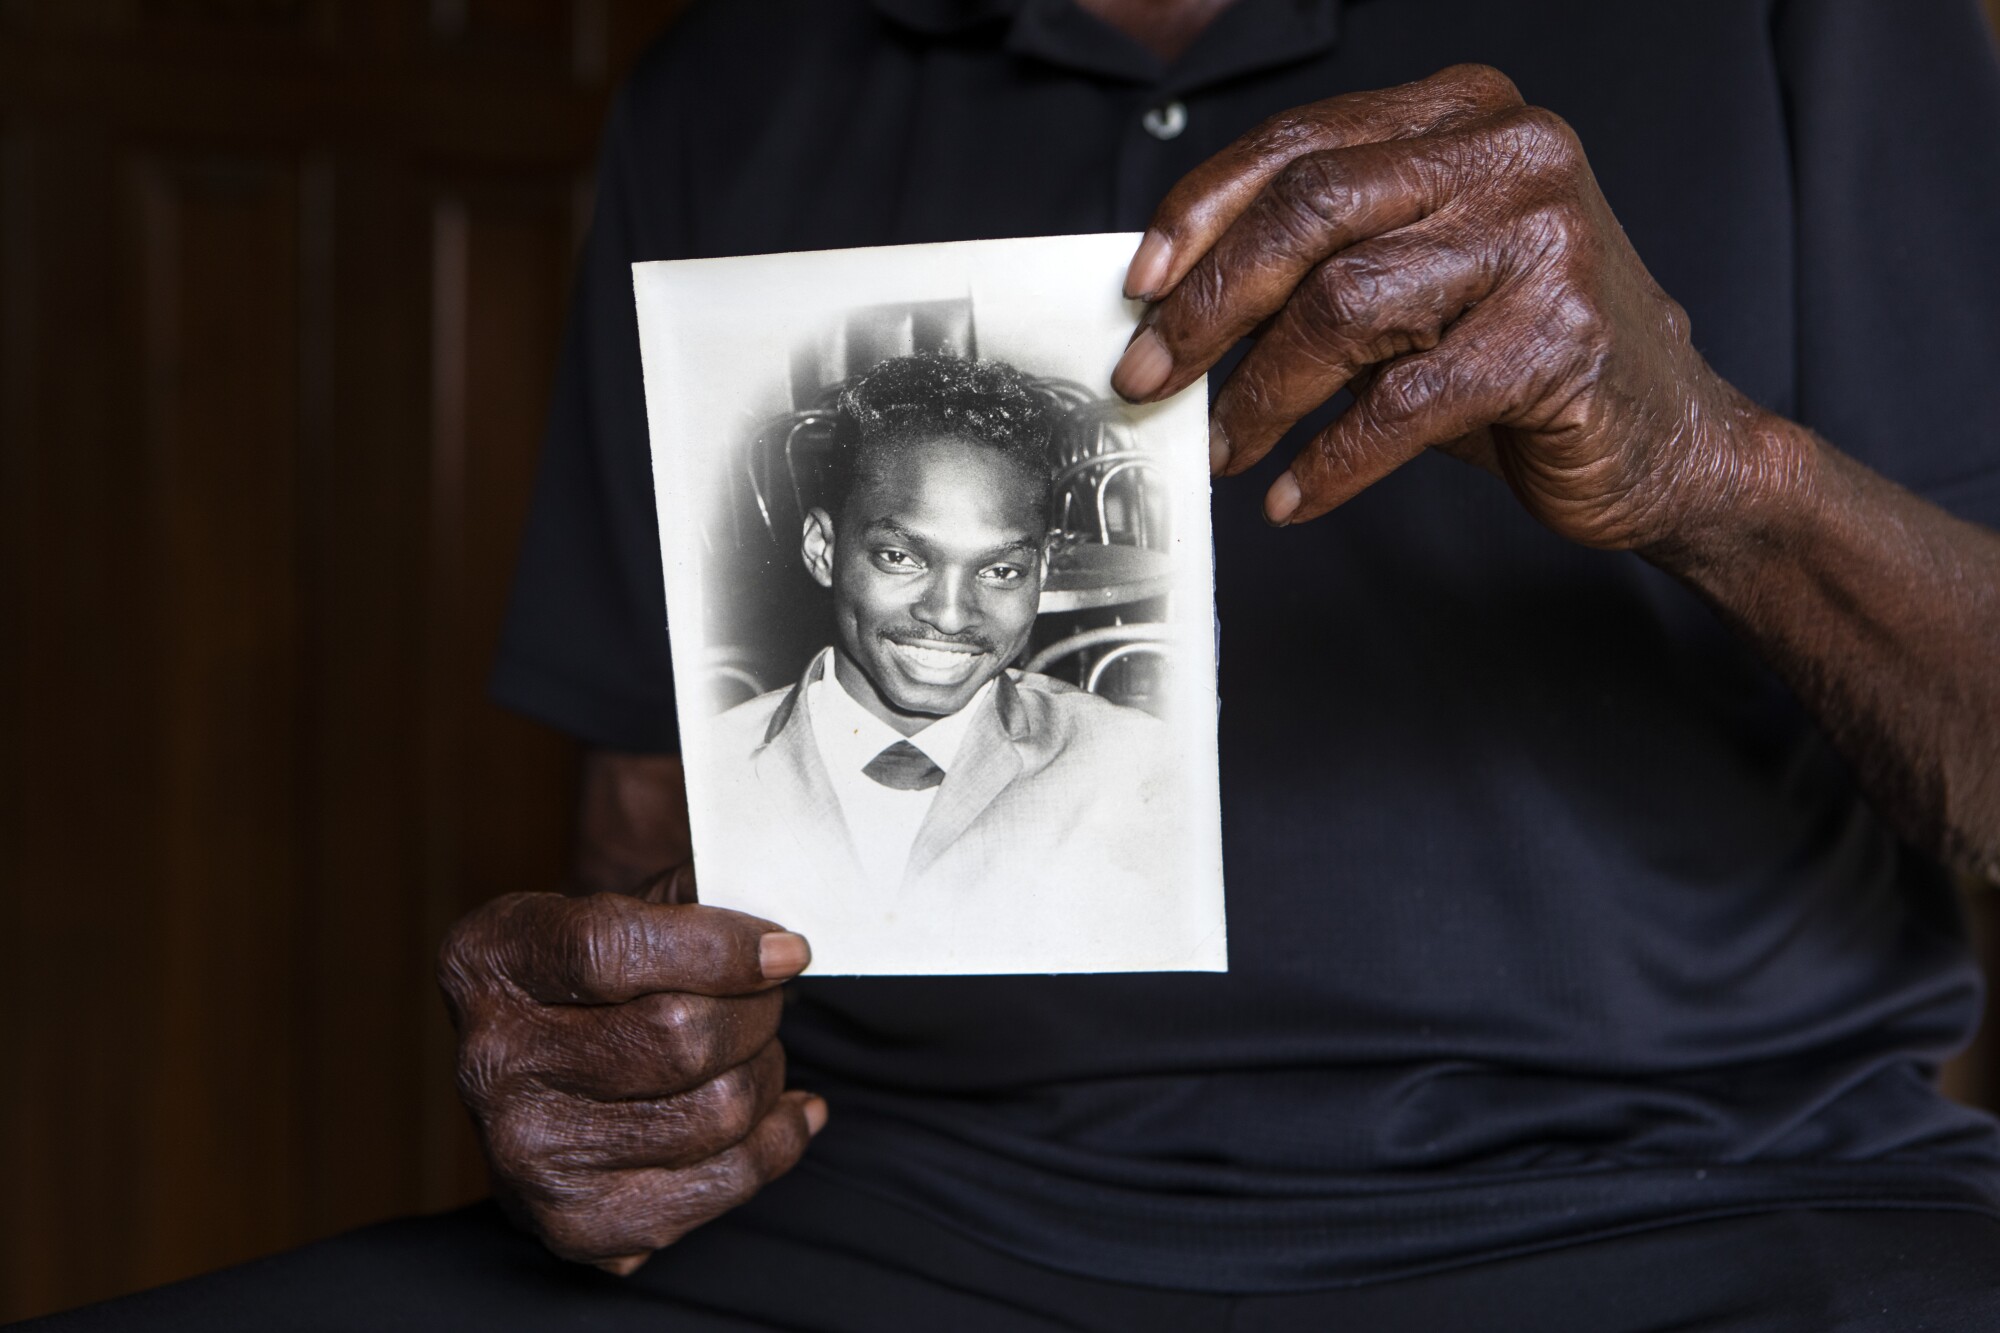 Robert Meeks Jr., 82, holds a portrait of himself as a young man. 